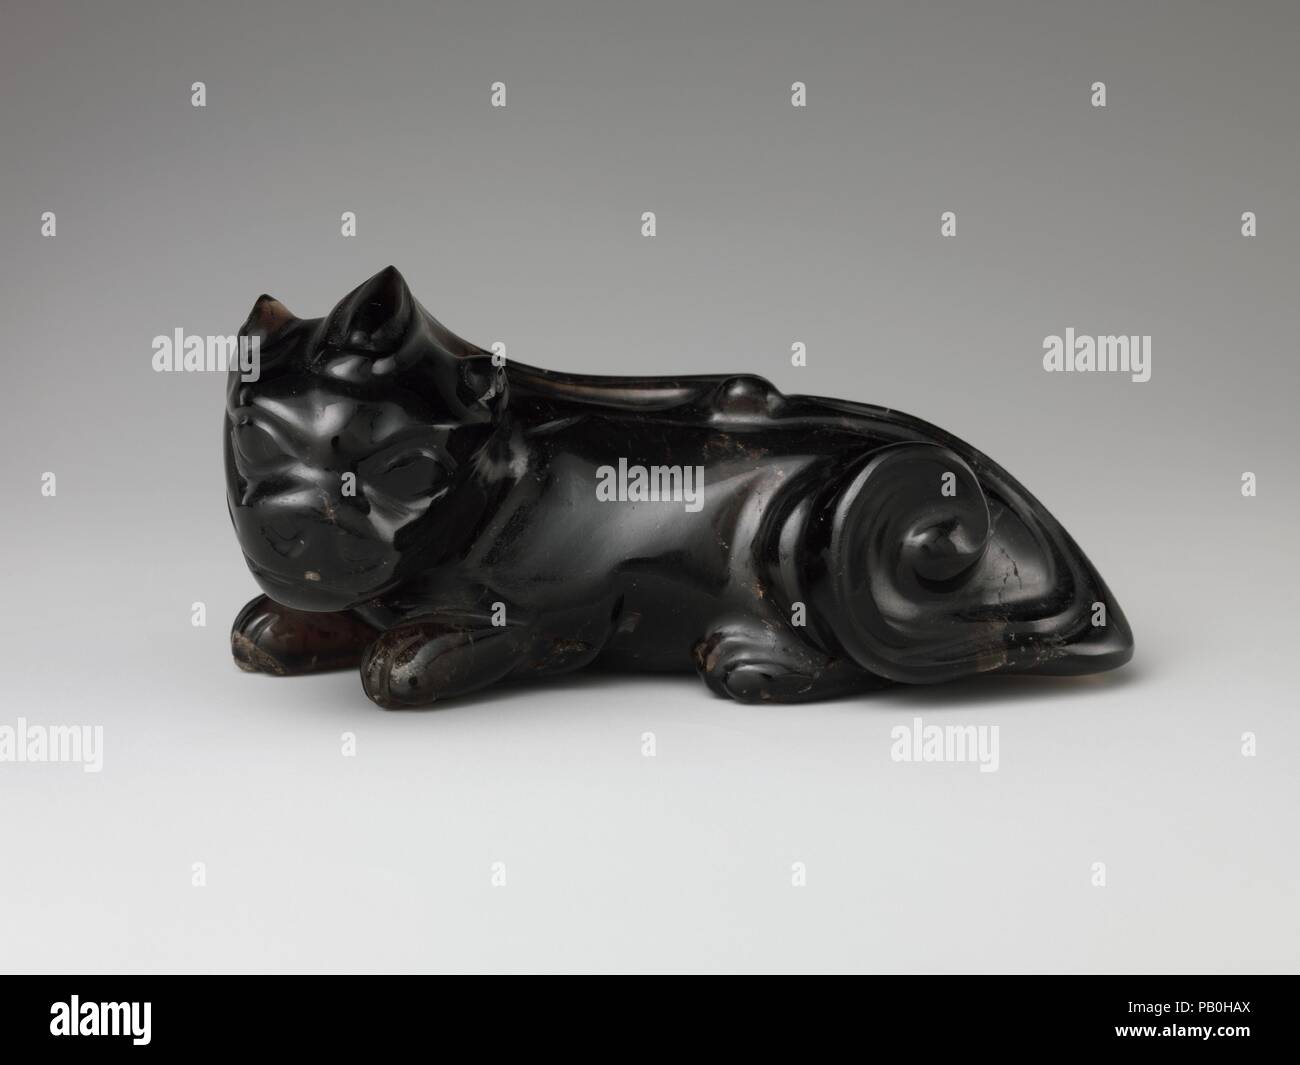 Figure of a fantastic animal. Culture: China. Dimensions: H. 4 1/2 in. (11.4 cm); W. 2 1/8 in. (5.4 cm). Museum: Metropolitan Museum of Art, New York, USA. Stock Photo